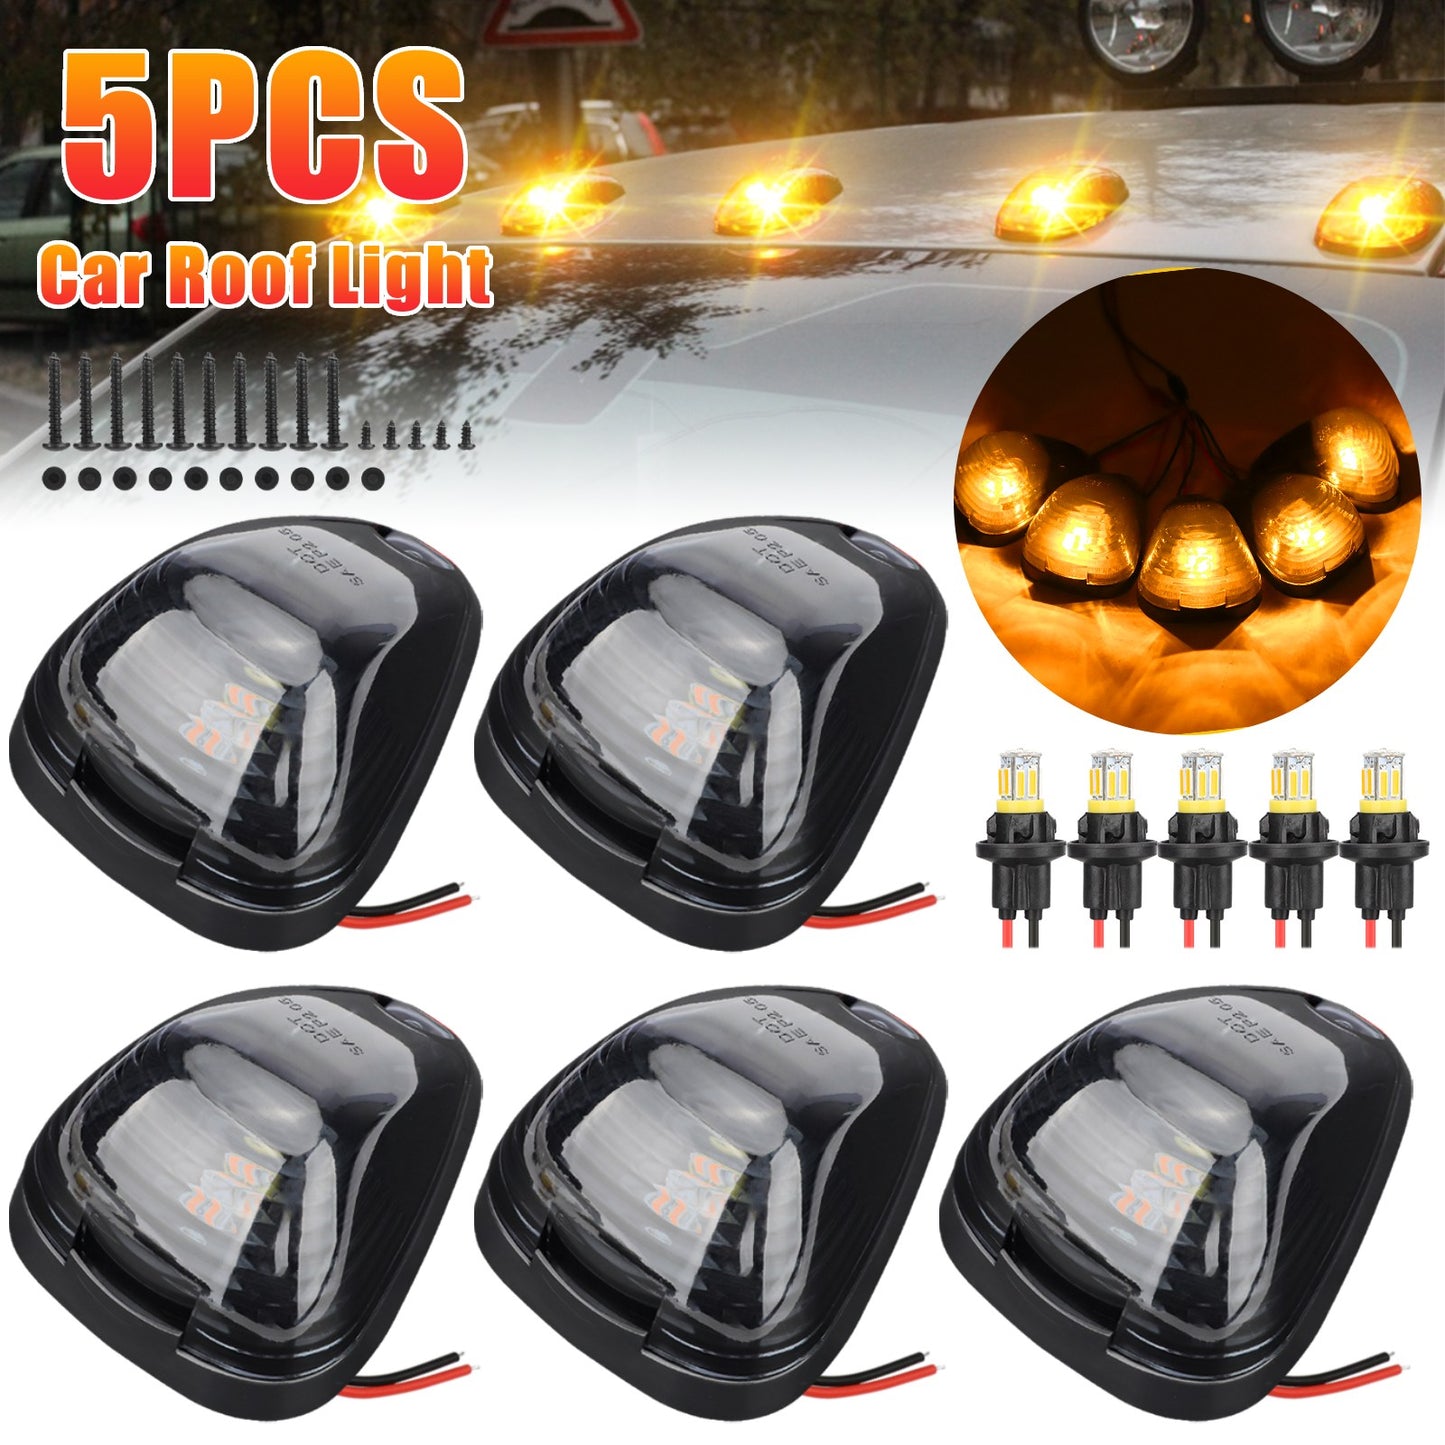 5PCS LED Cab Roof Marker Lights - T10 LED Bulb,Smoked LED Marker Lamps Kit Compatible with 1999-2016 Ford